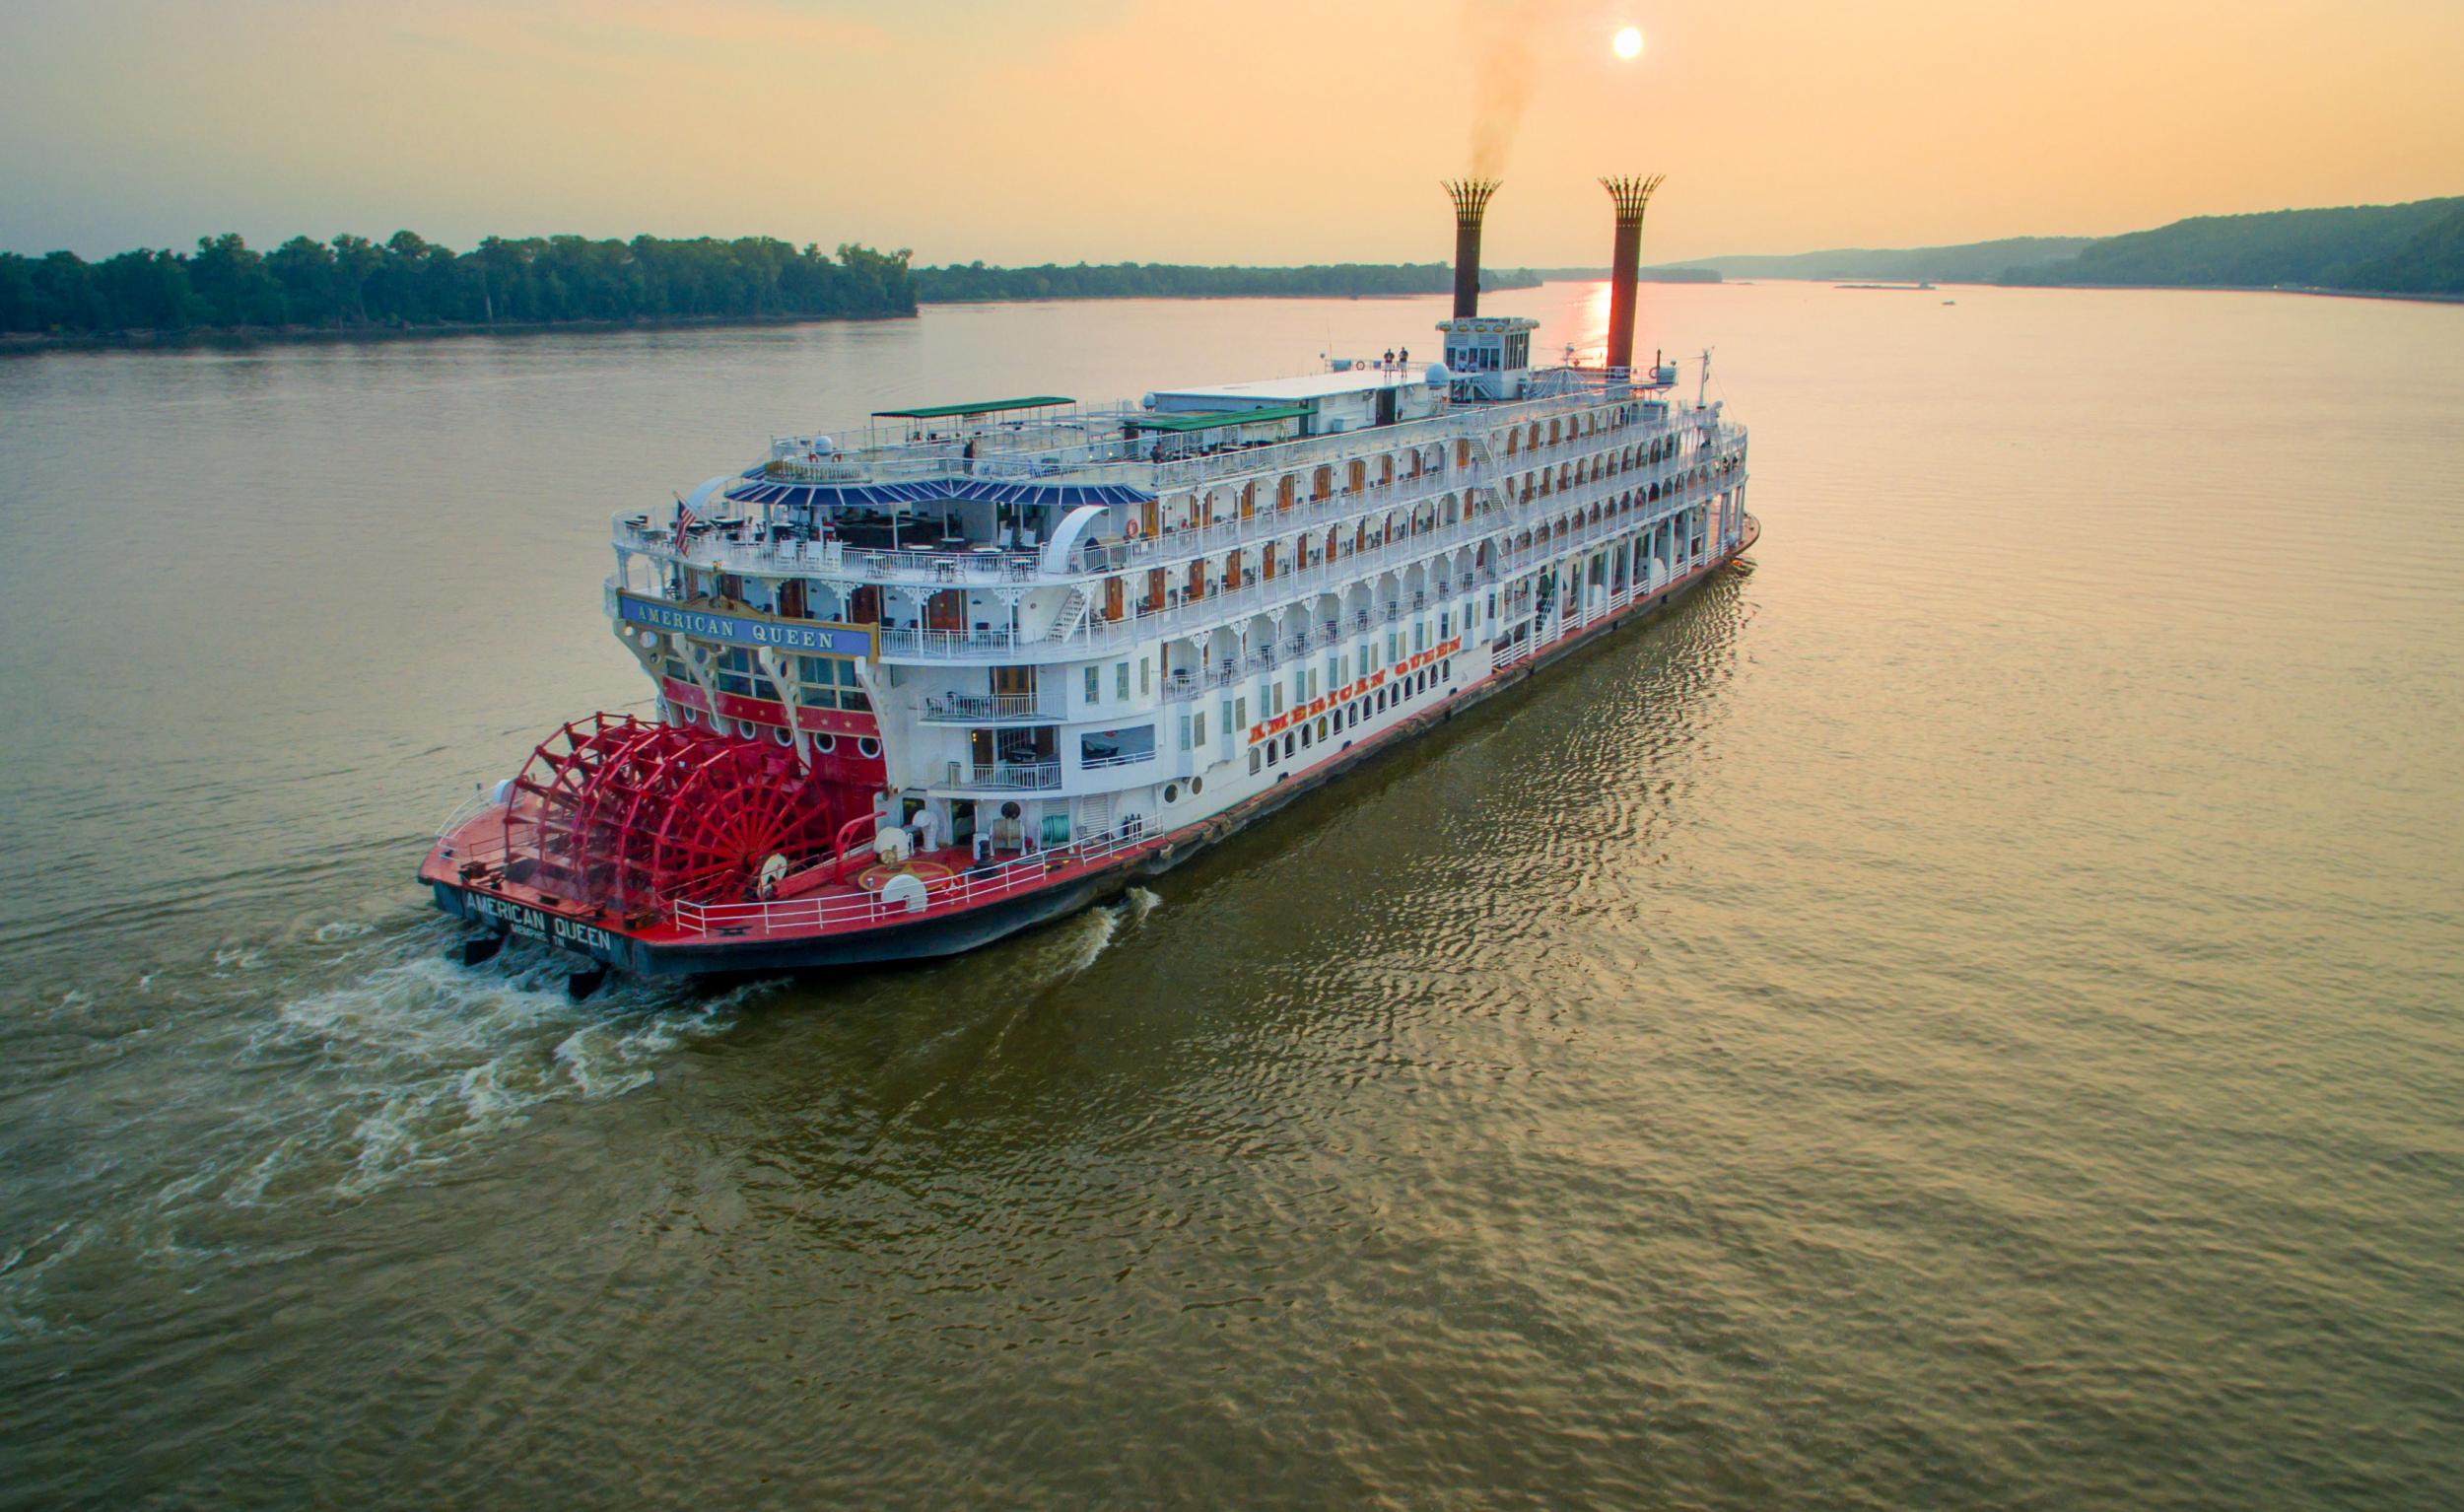 Up the river: the American Queen sails down the Mississippi